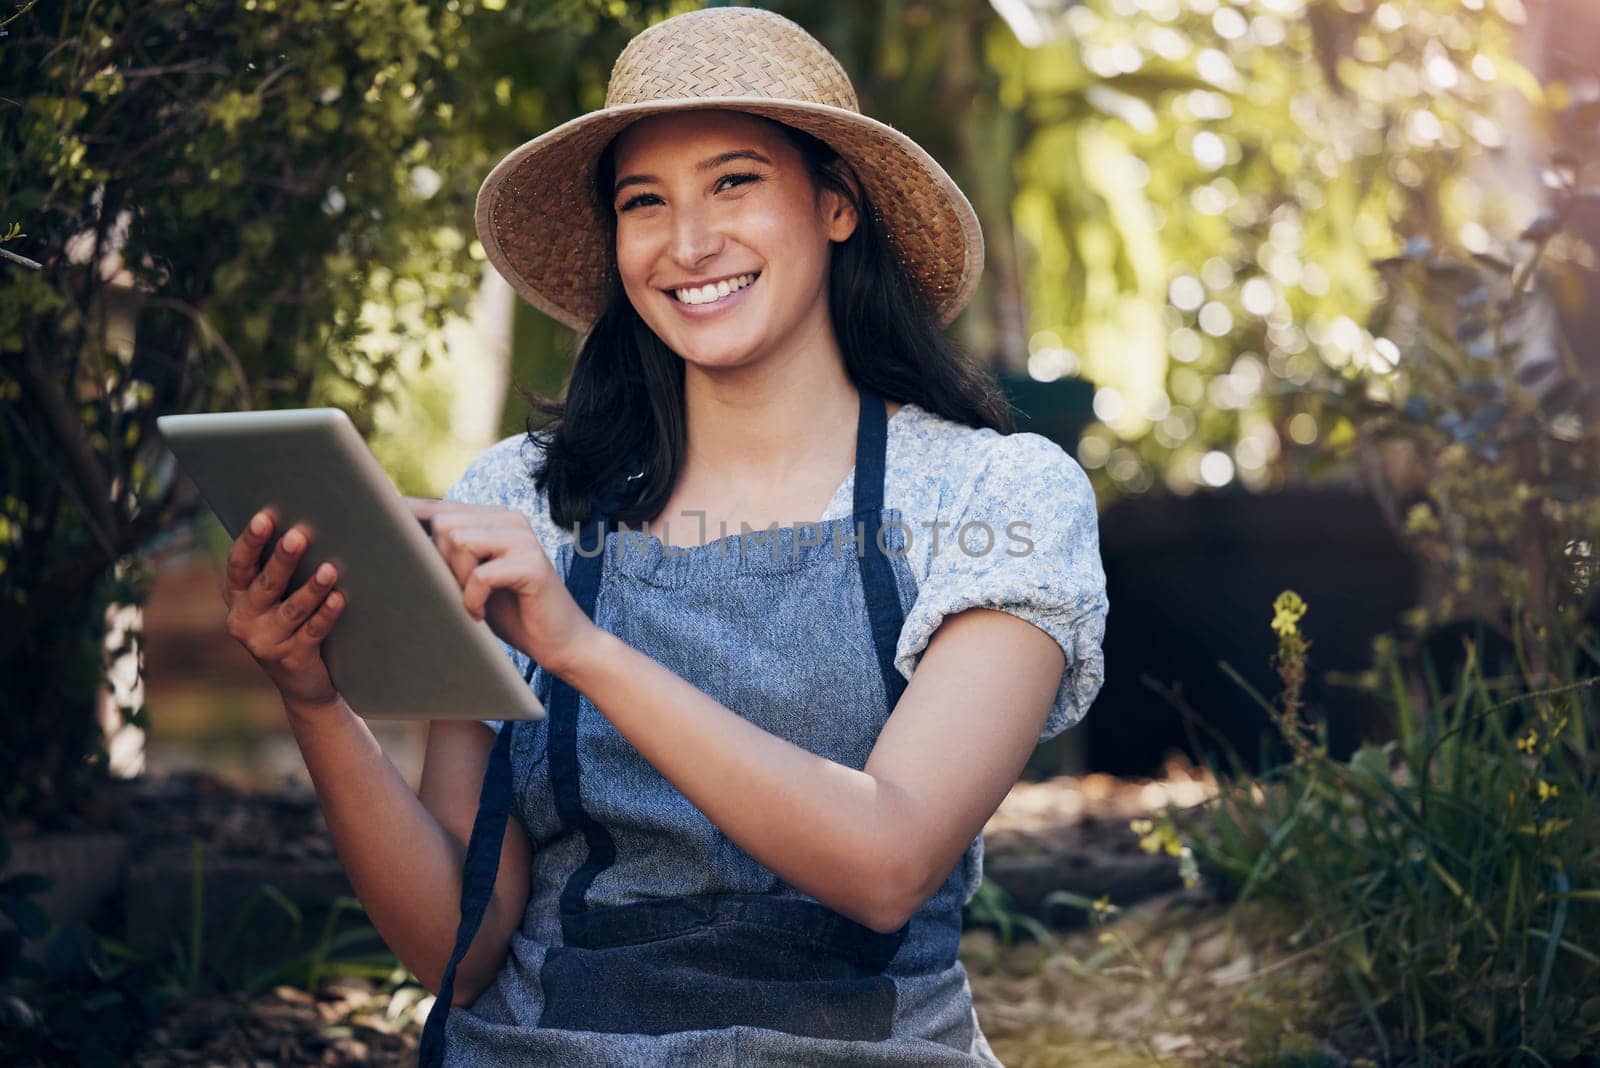 Tablet, smile and portrait of woman in garden for agriculture, farm or sustainability in Brazil. Face, tech and happy person in greenhouse nursery for ecology, growth or florist check natural plants by YuriArcurs